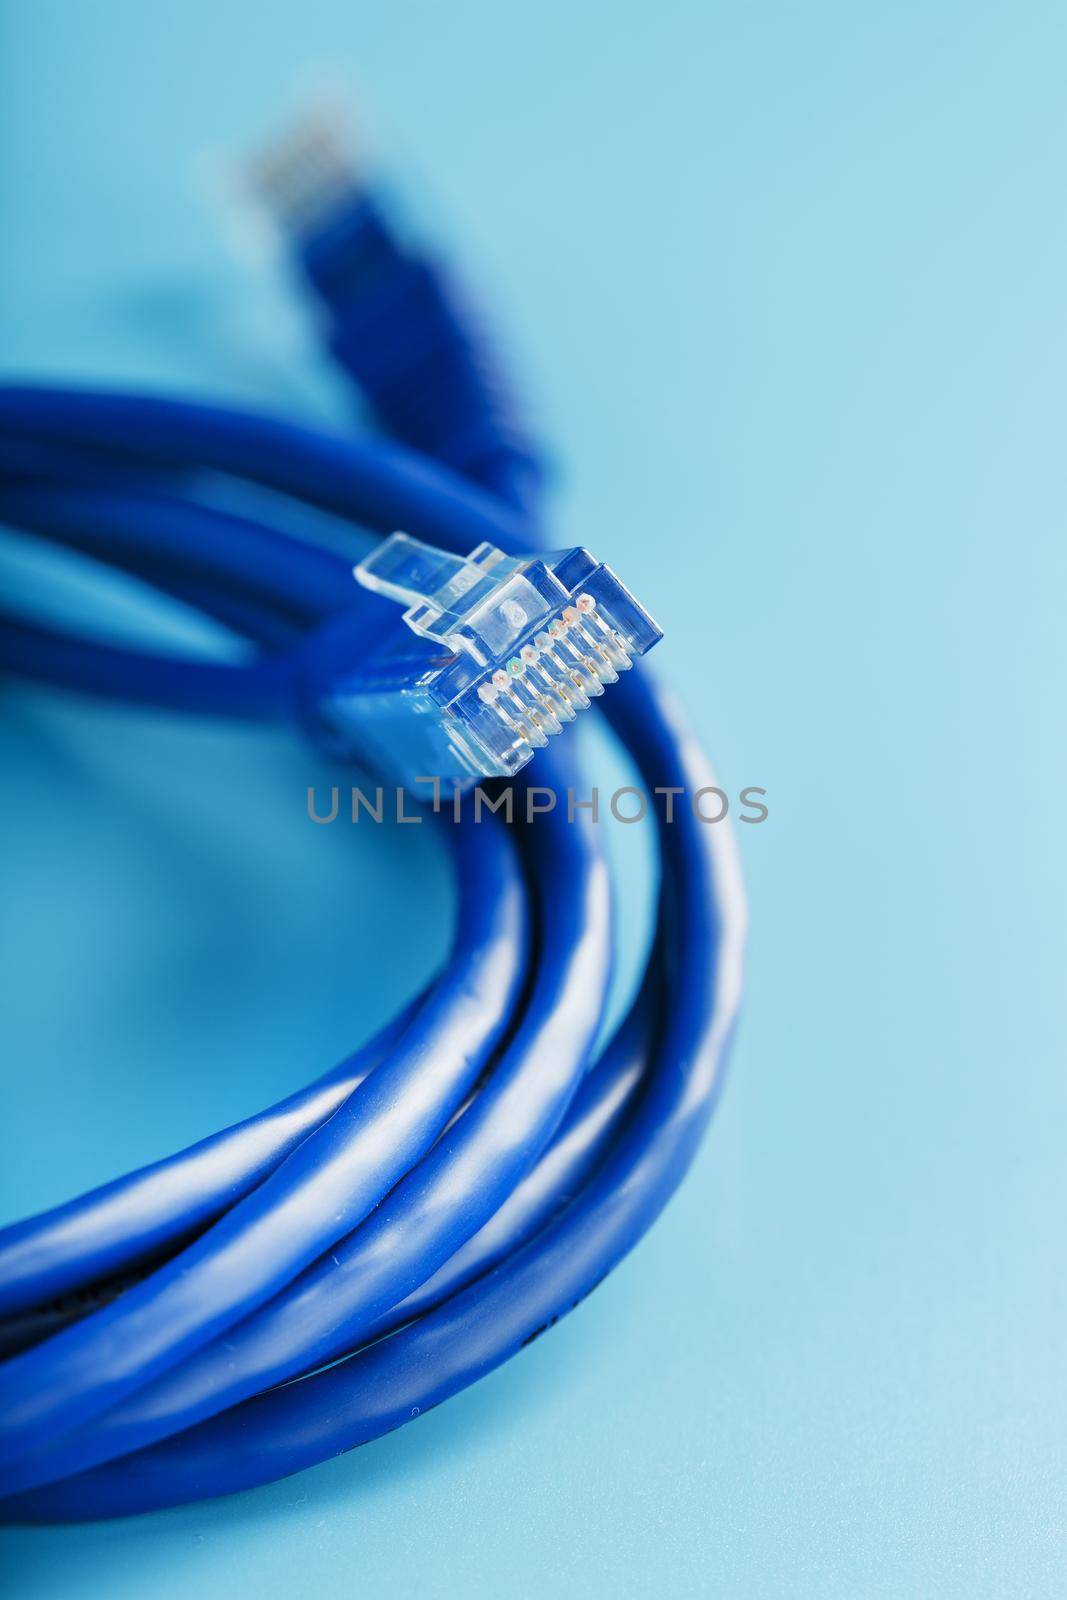 Blue UTP Internet Cable - Isolated on a blue background Ethernet Cord